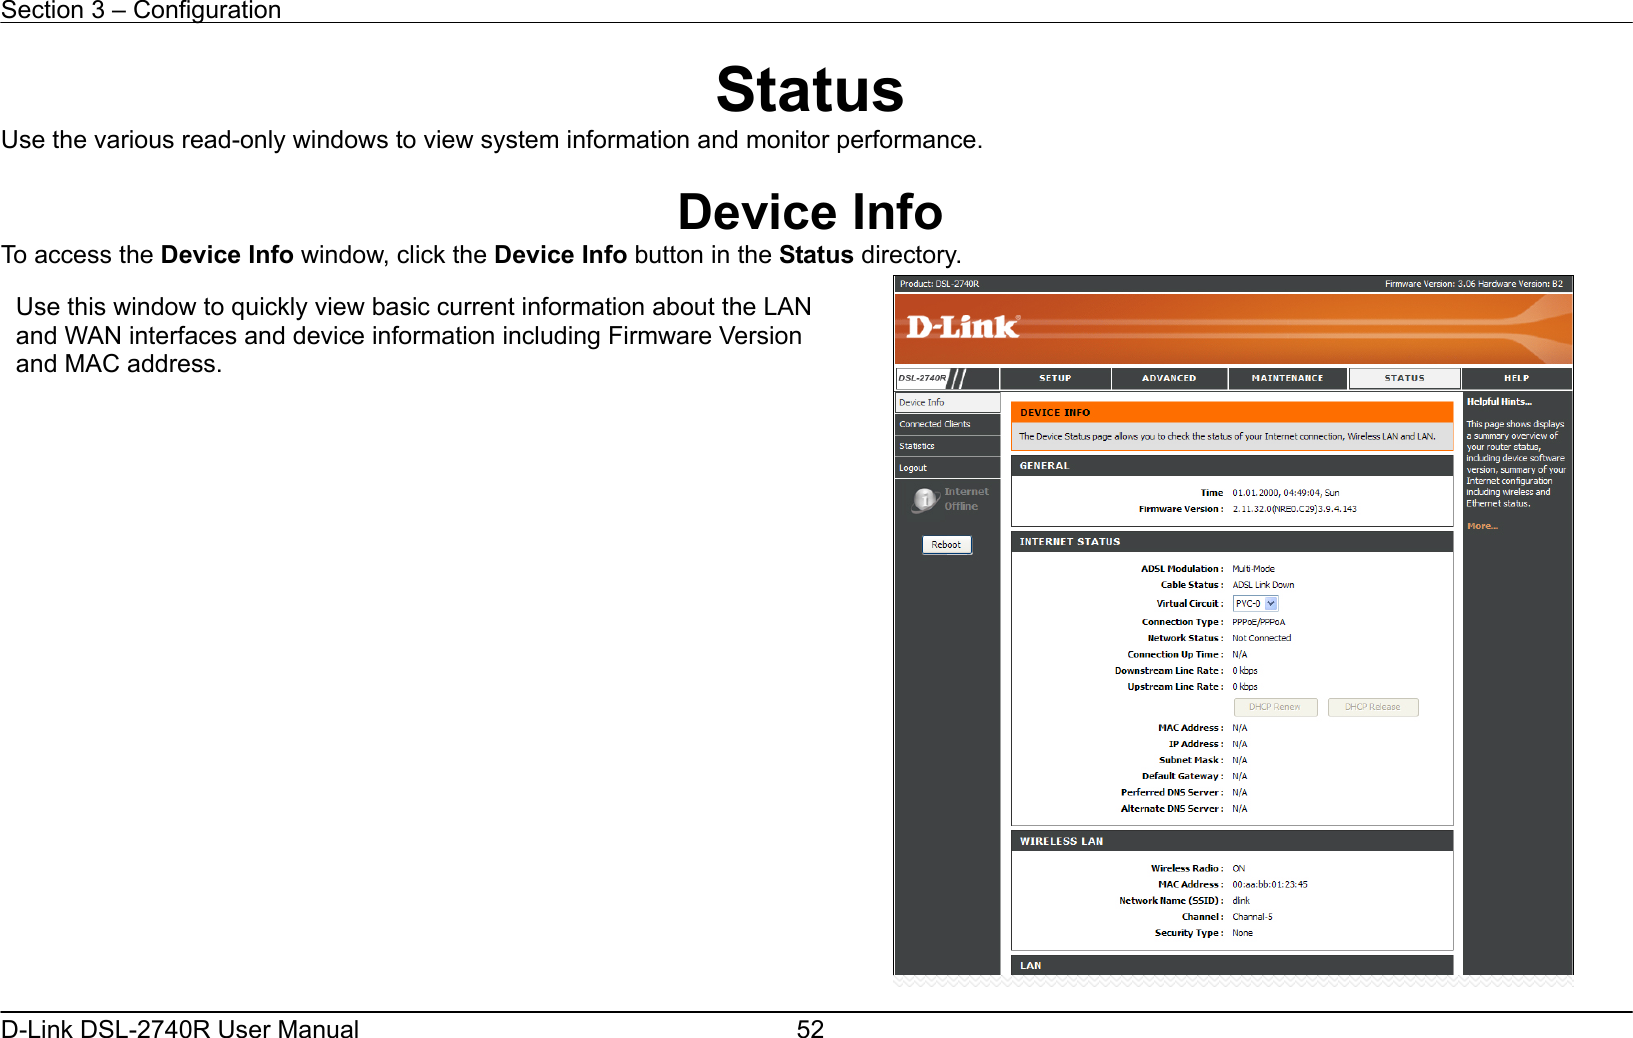 Section 3 – Configuration   D-Link DSL-2740R User Manual  52Status Use the various read-only windows to view system information and monitor performance.  Device Info To access the Device Info window, click the Device Info button in the Status directory.  Use this window to quickly view basic current information about the LAN and WAN interfaces and device information including Firmware Version and MAC address. 